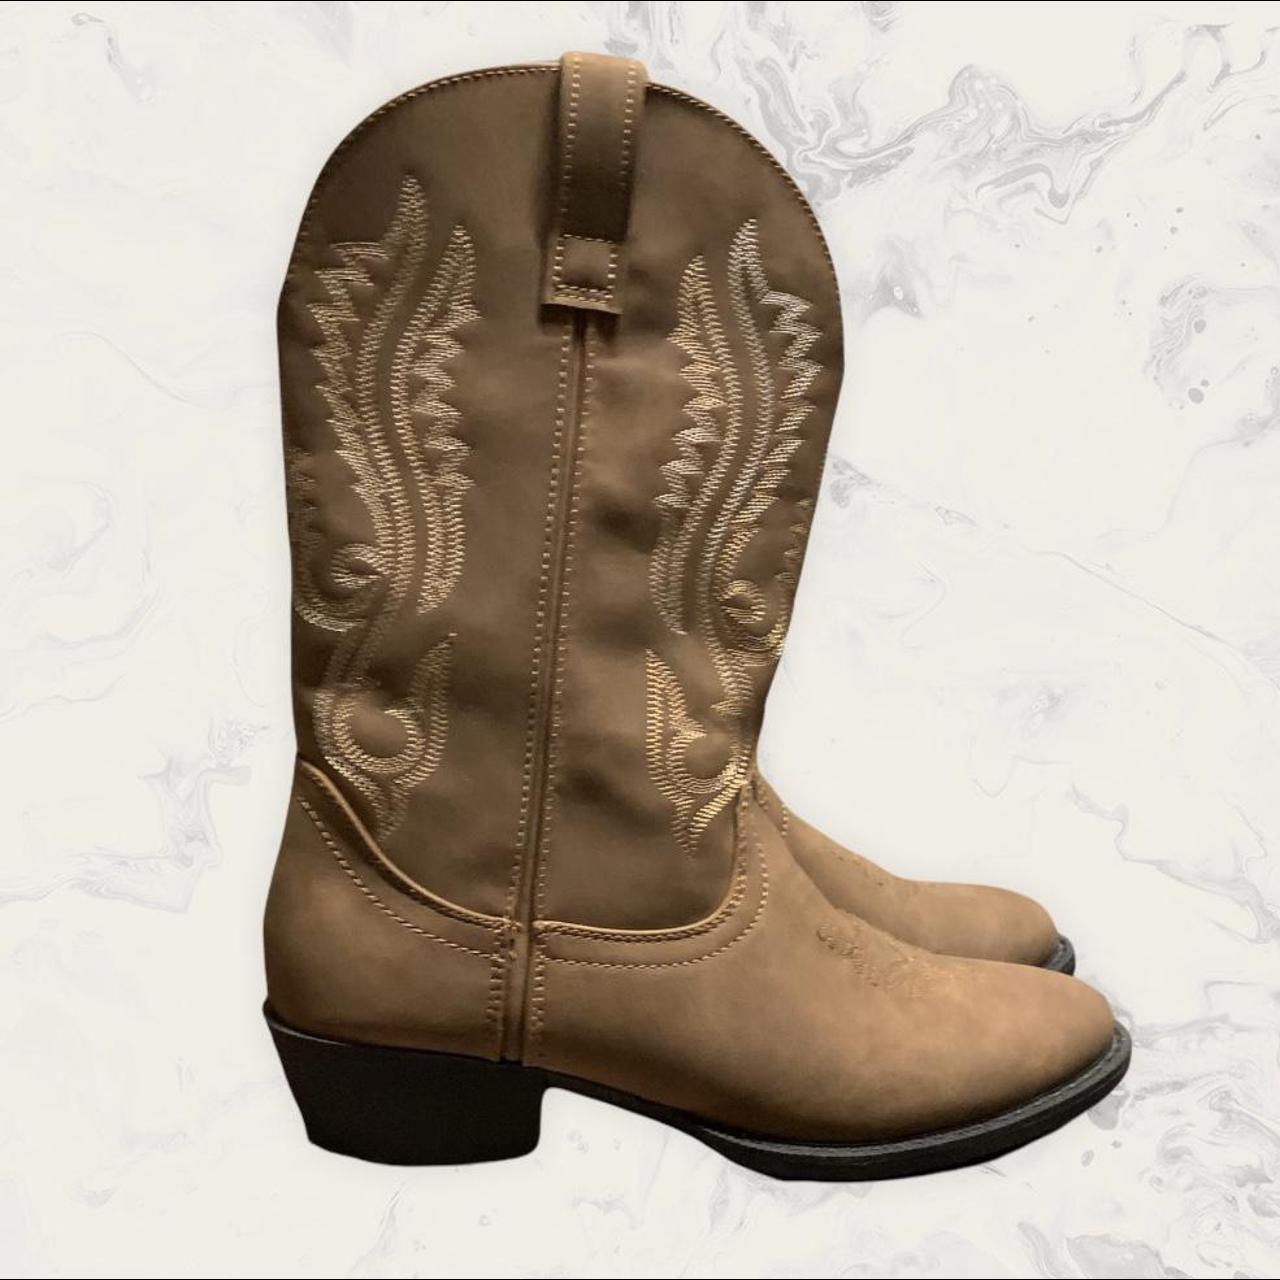 Women's Brown and Tan Boots